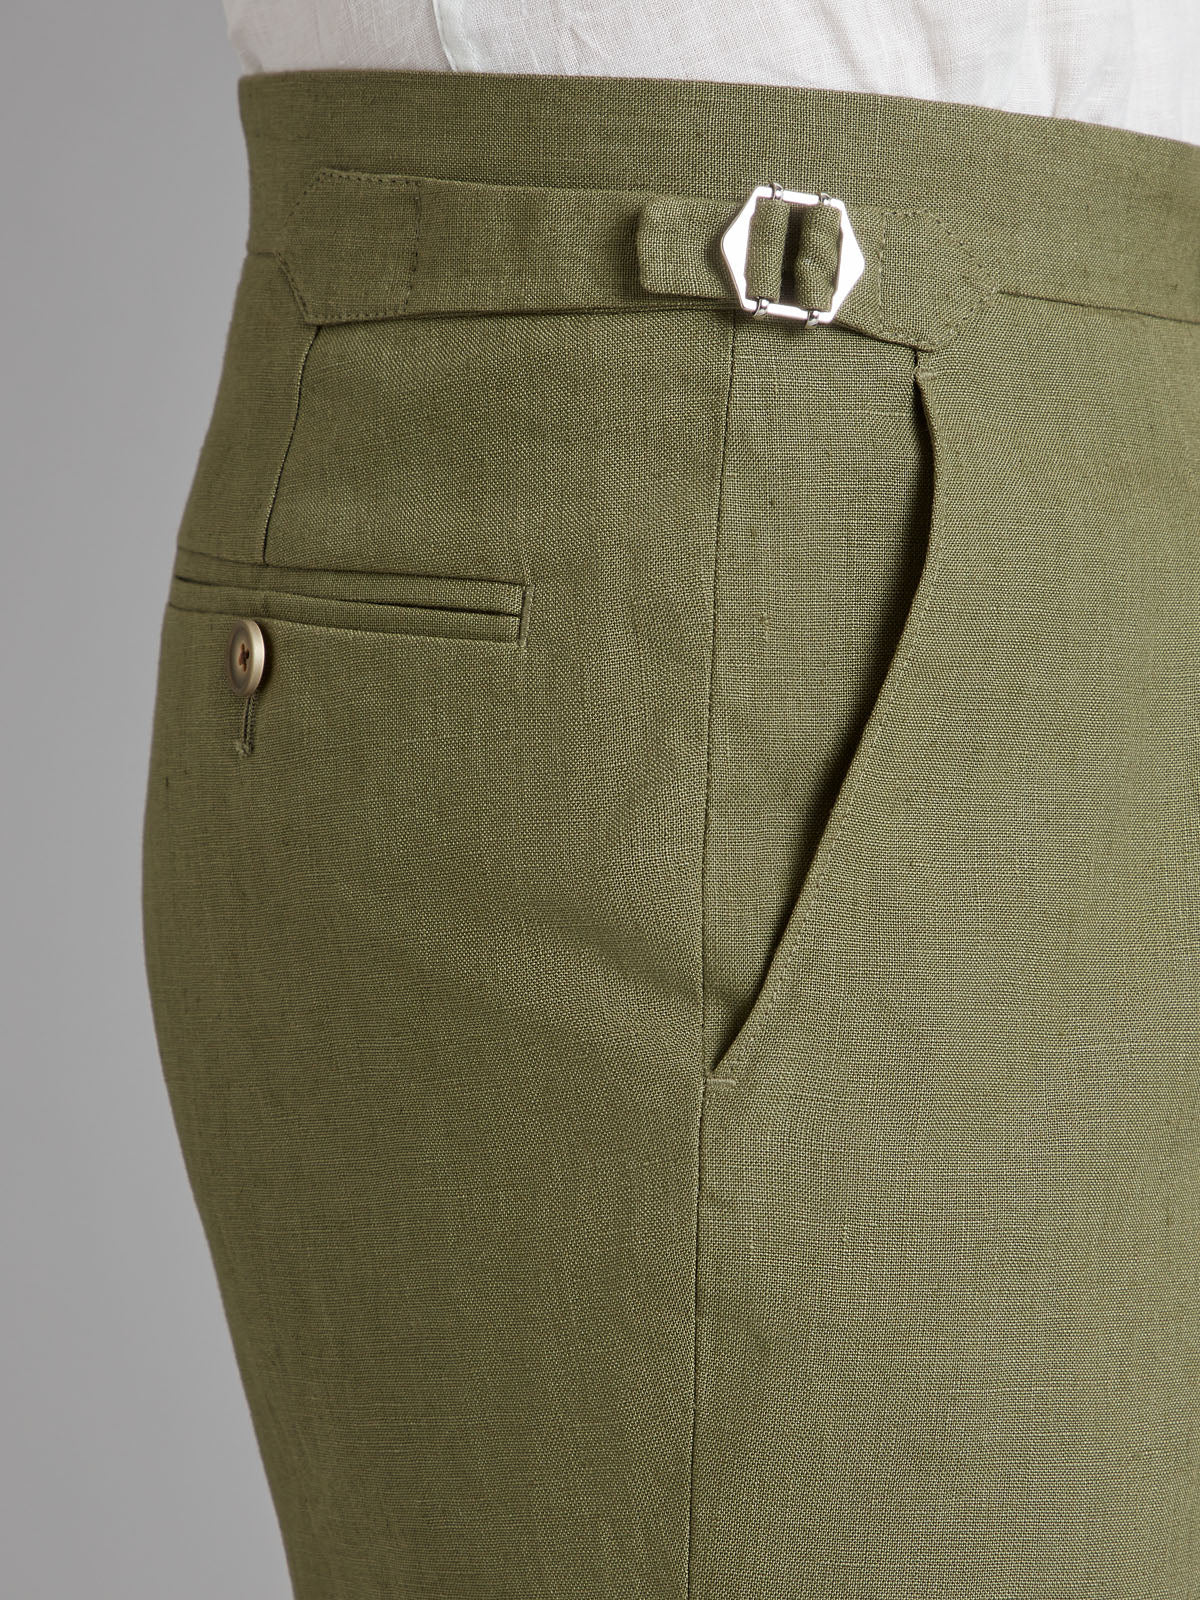 Pleated Shorts - Sage Green Linen